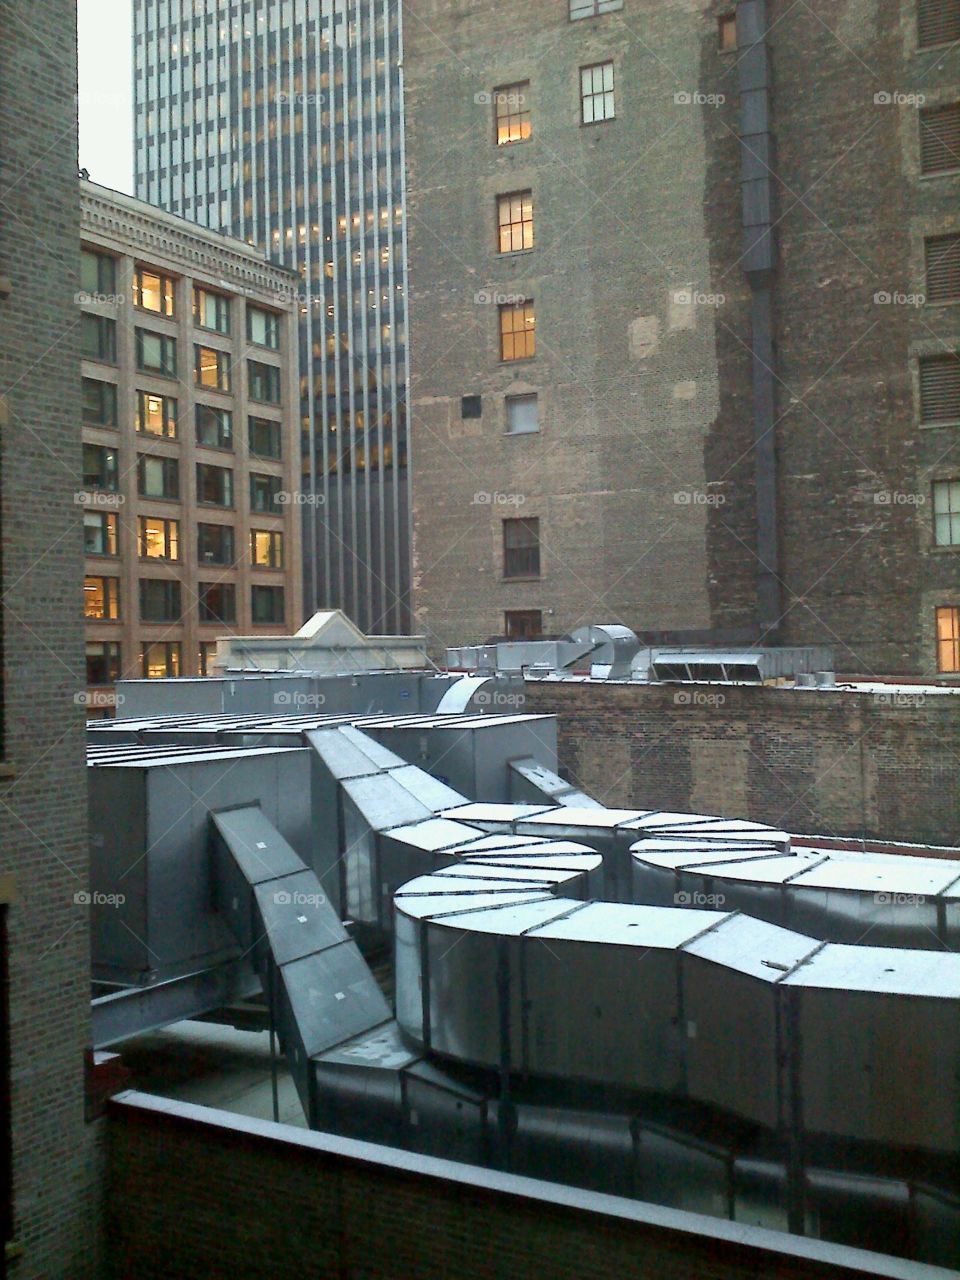 Check Out the View. The view from our hotel in Chicago 